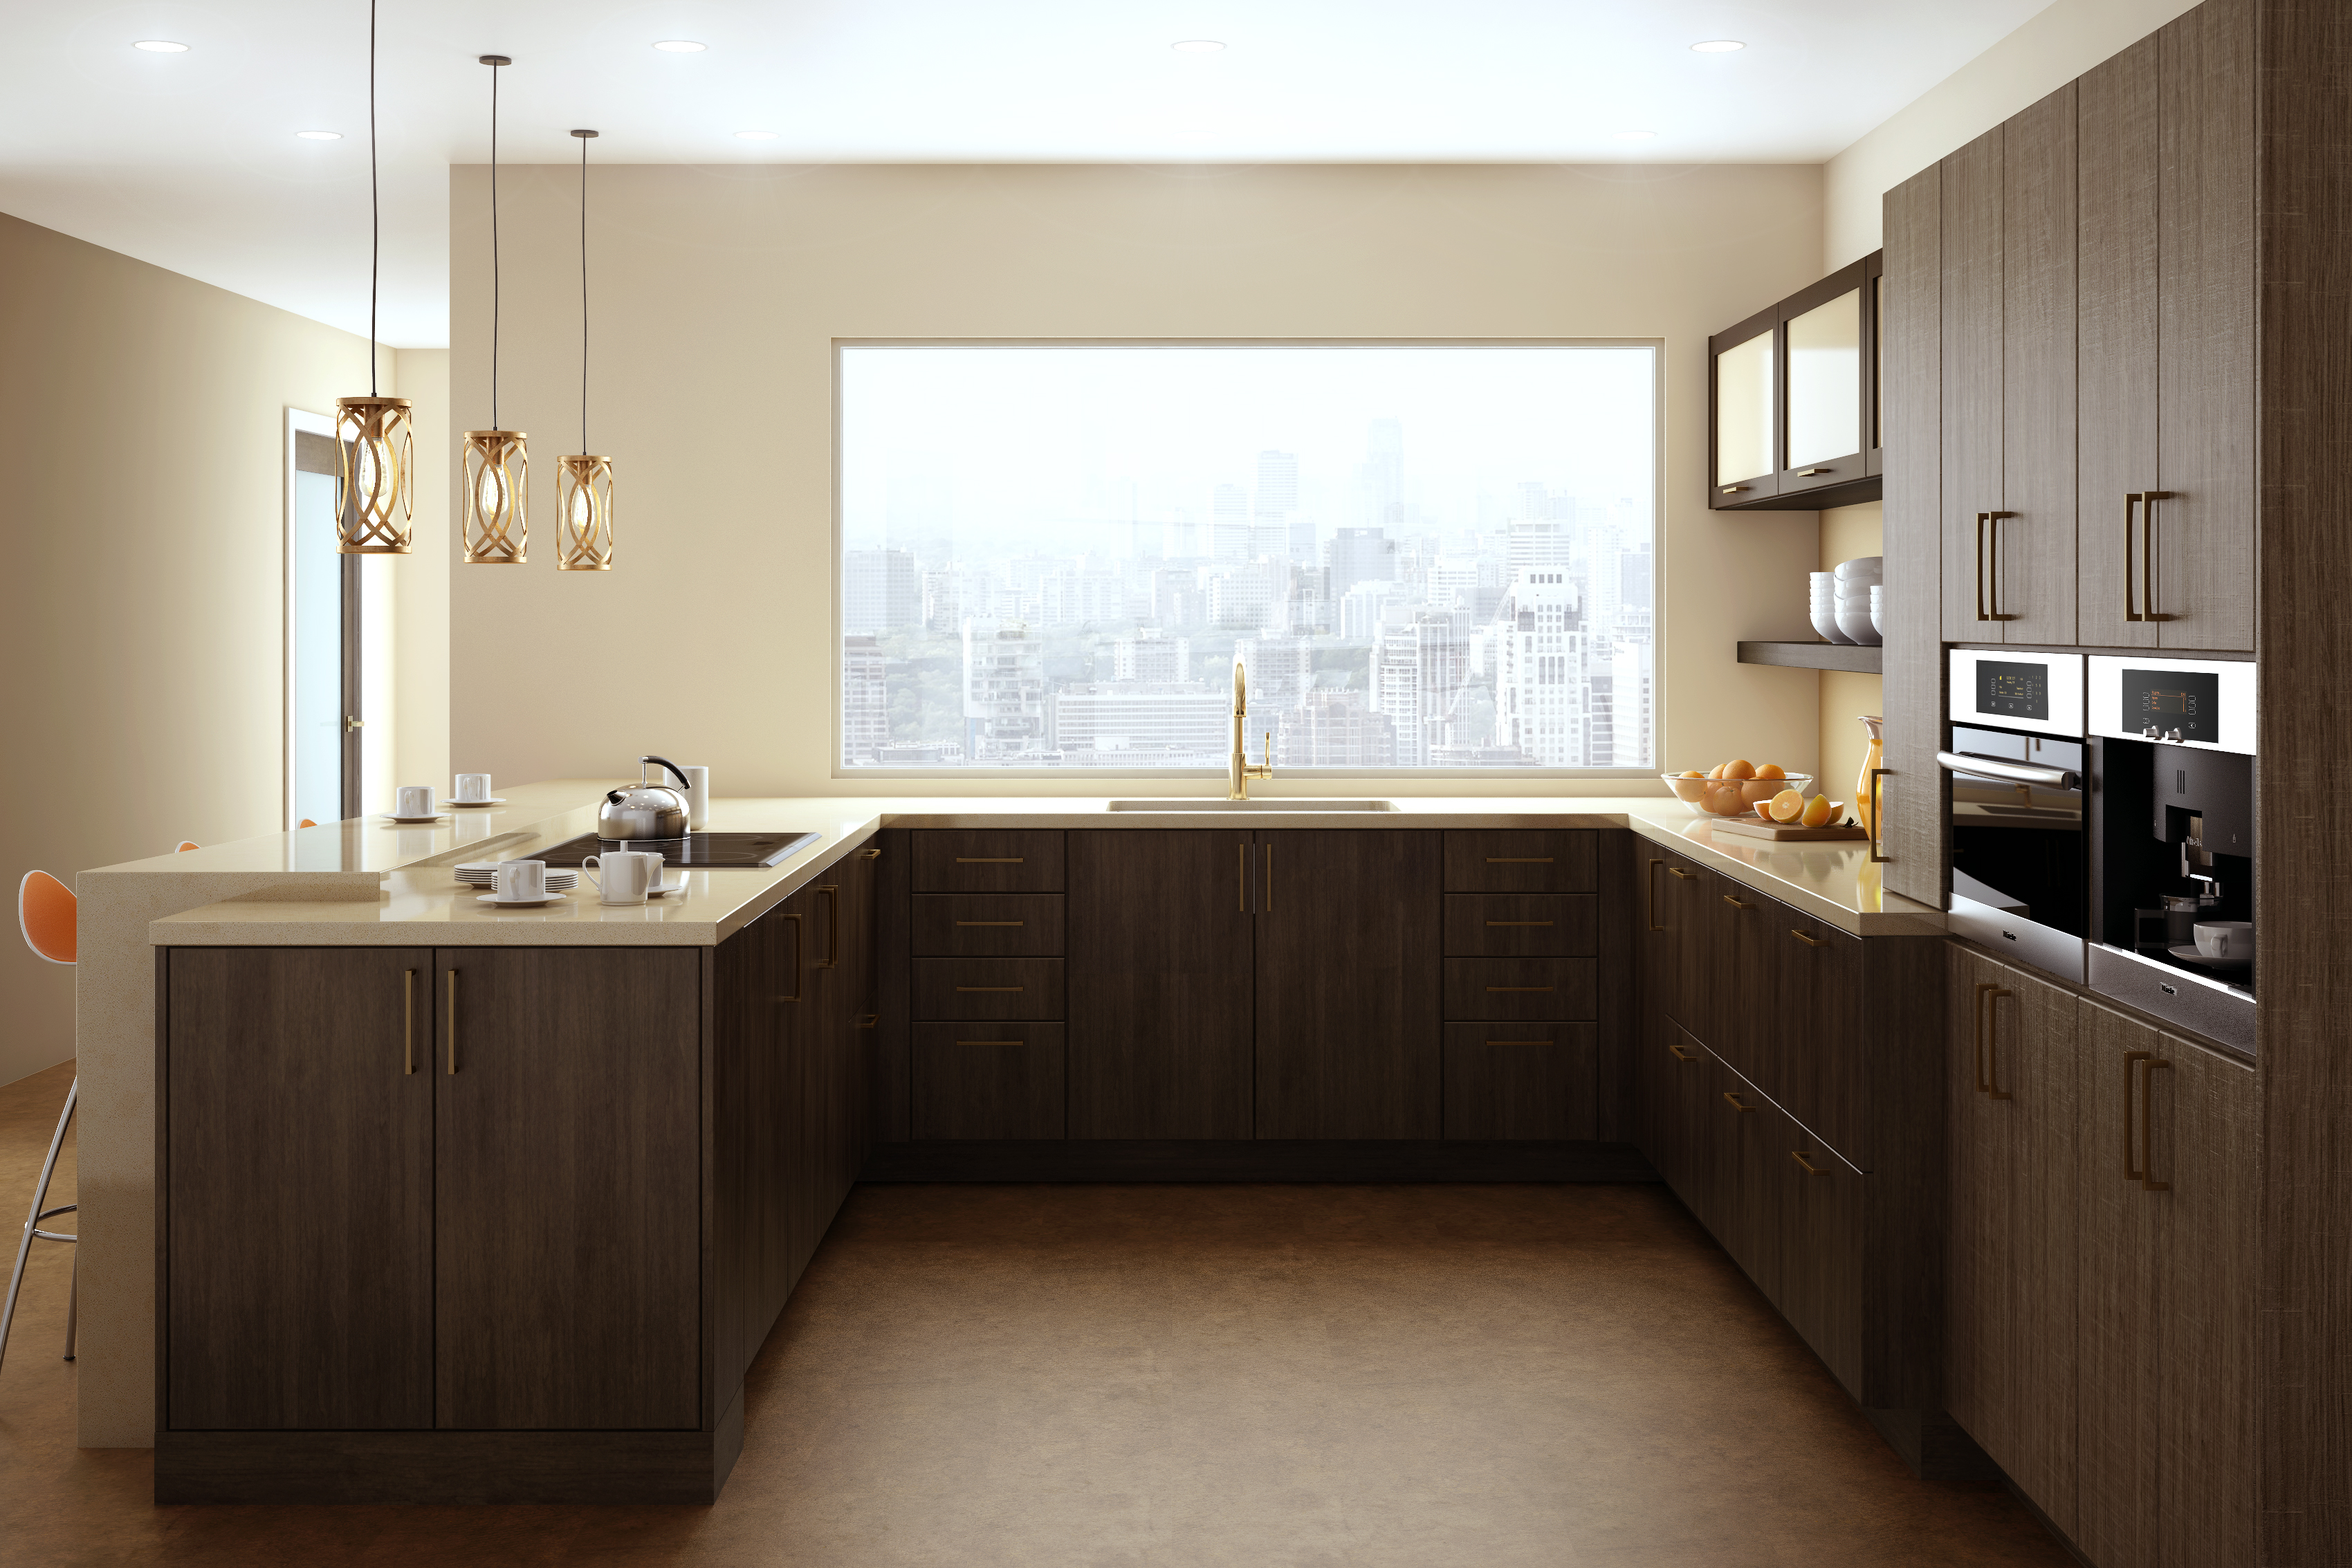 A city loft appartment with a stunning view and modern cabinets in a sleek and contemporary kitchen design. Featuring Dura Supreme frameless cabinets.